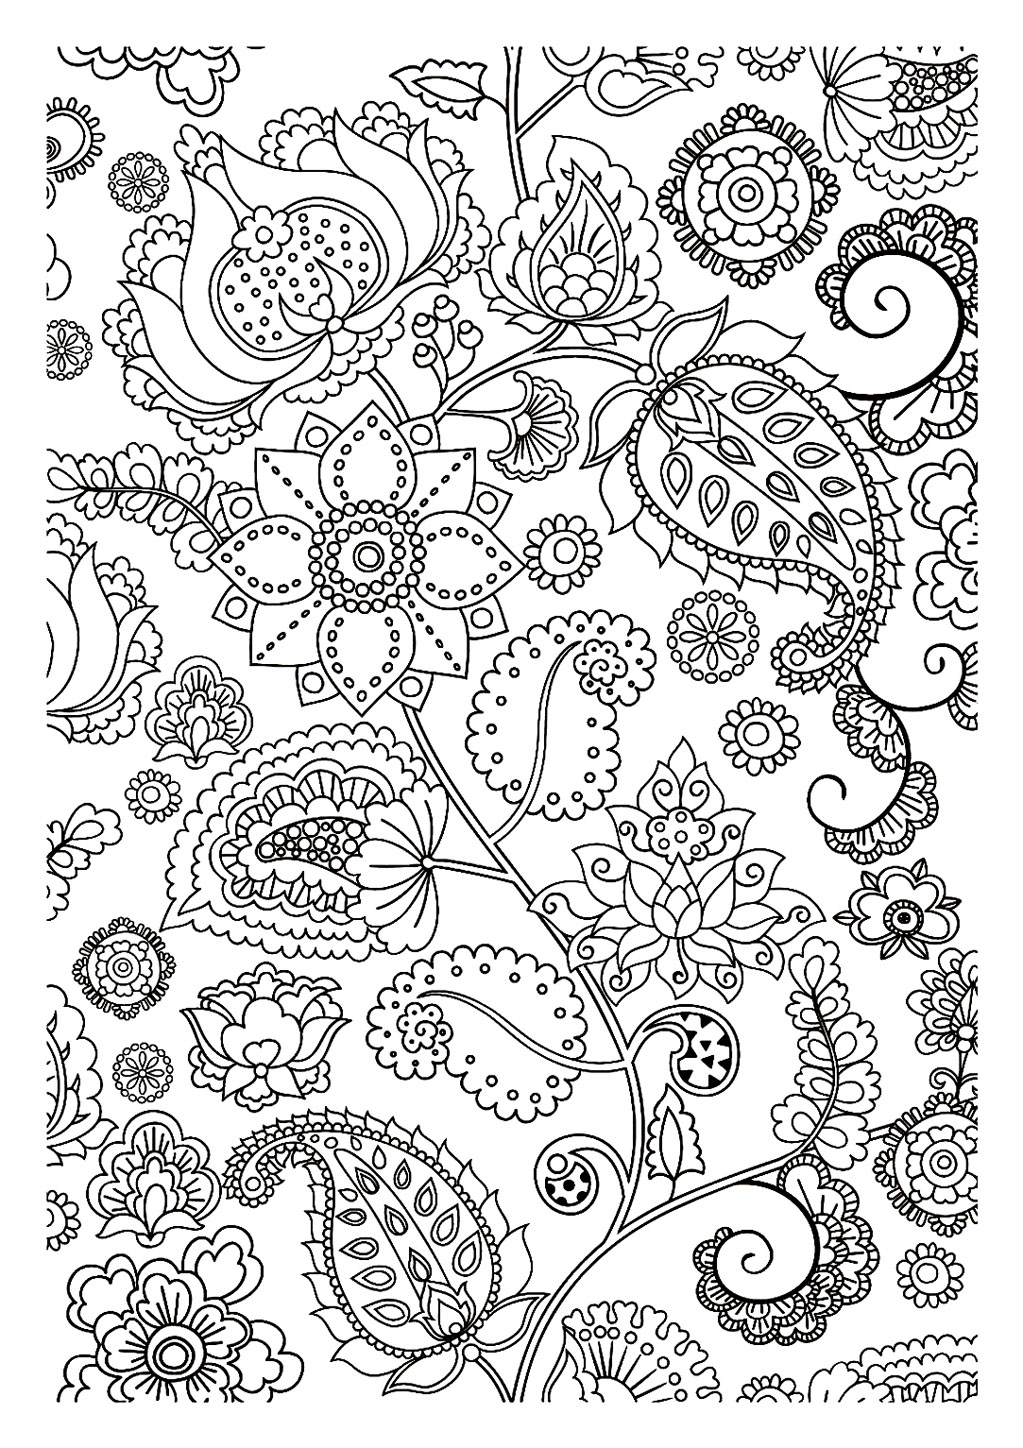 Perfect Anti-stress coloring page with some flowers and leaves